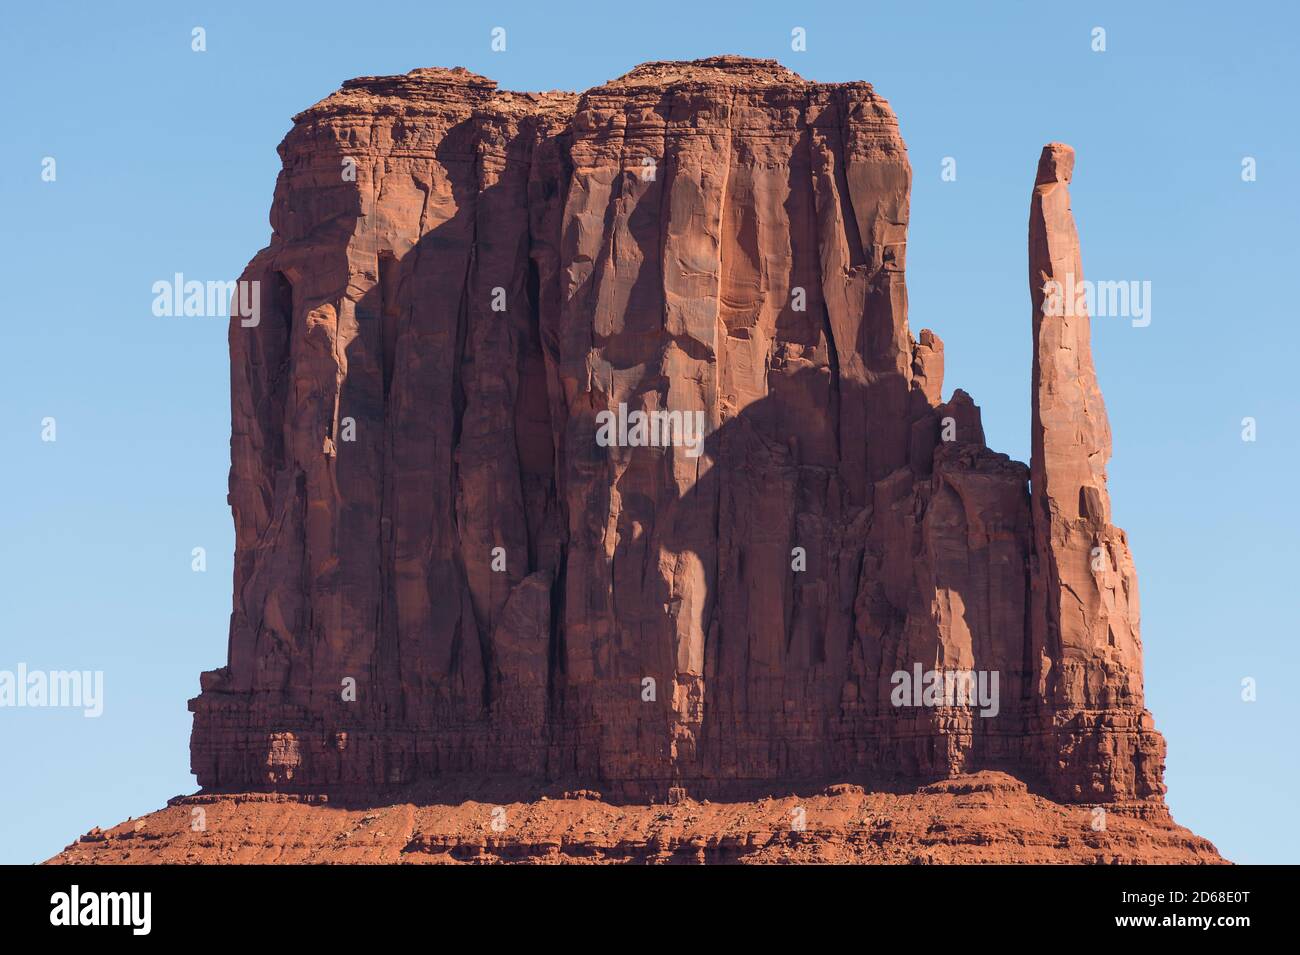 USA: the famous rock formations in Monument Valley, Arizona, typical landscape of the great American West Stock Photo